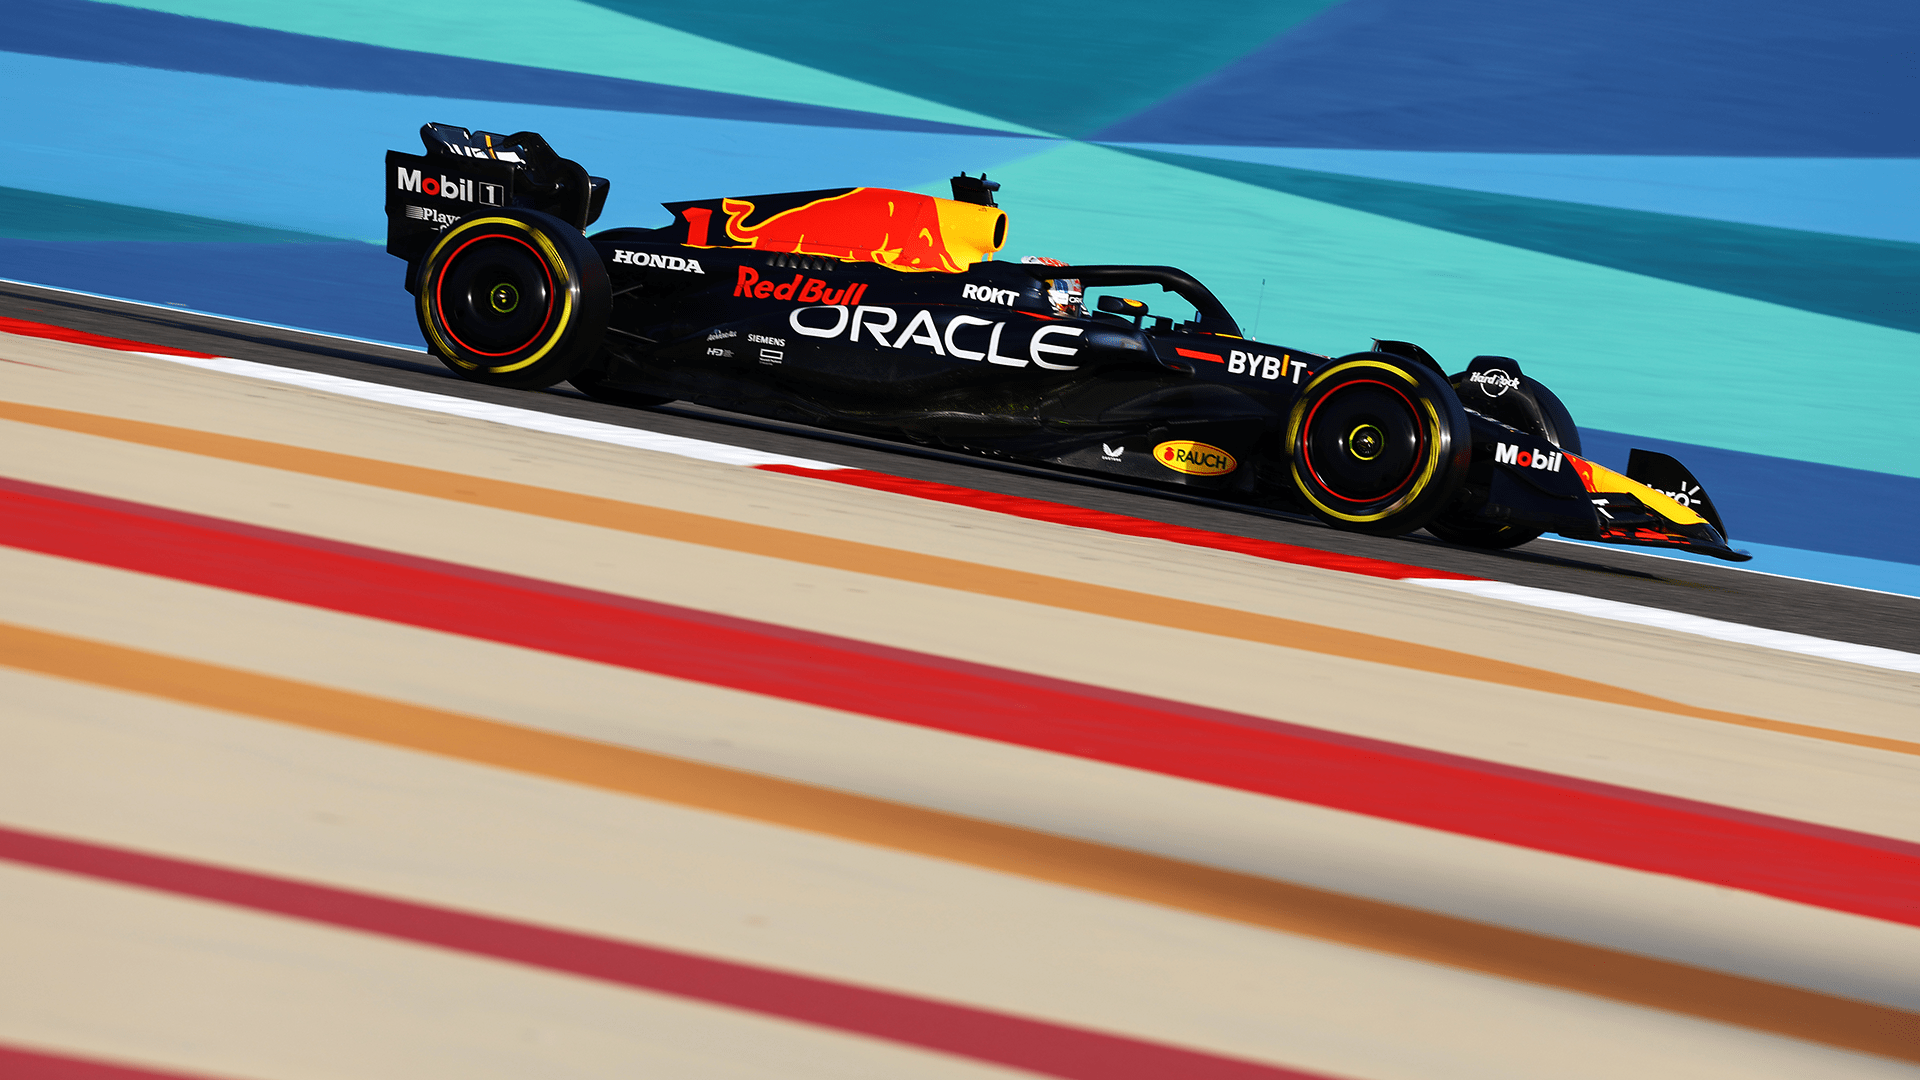 2023 F1 Testing Day 1 Report And Highlights: Verstappen Edges Out Alonso As F1 2023 Kicks Off With First Day Of Pre Season Testing In Bahrain. Formula 1®